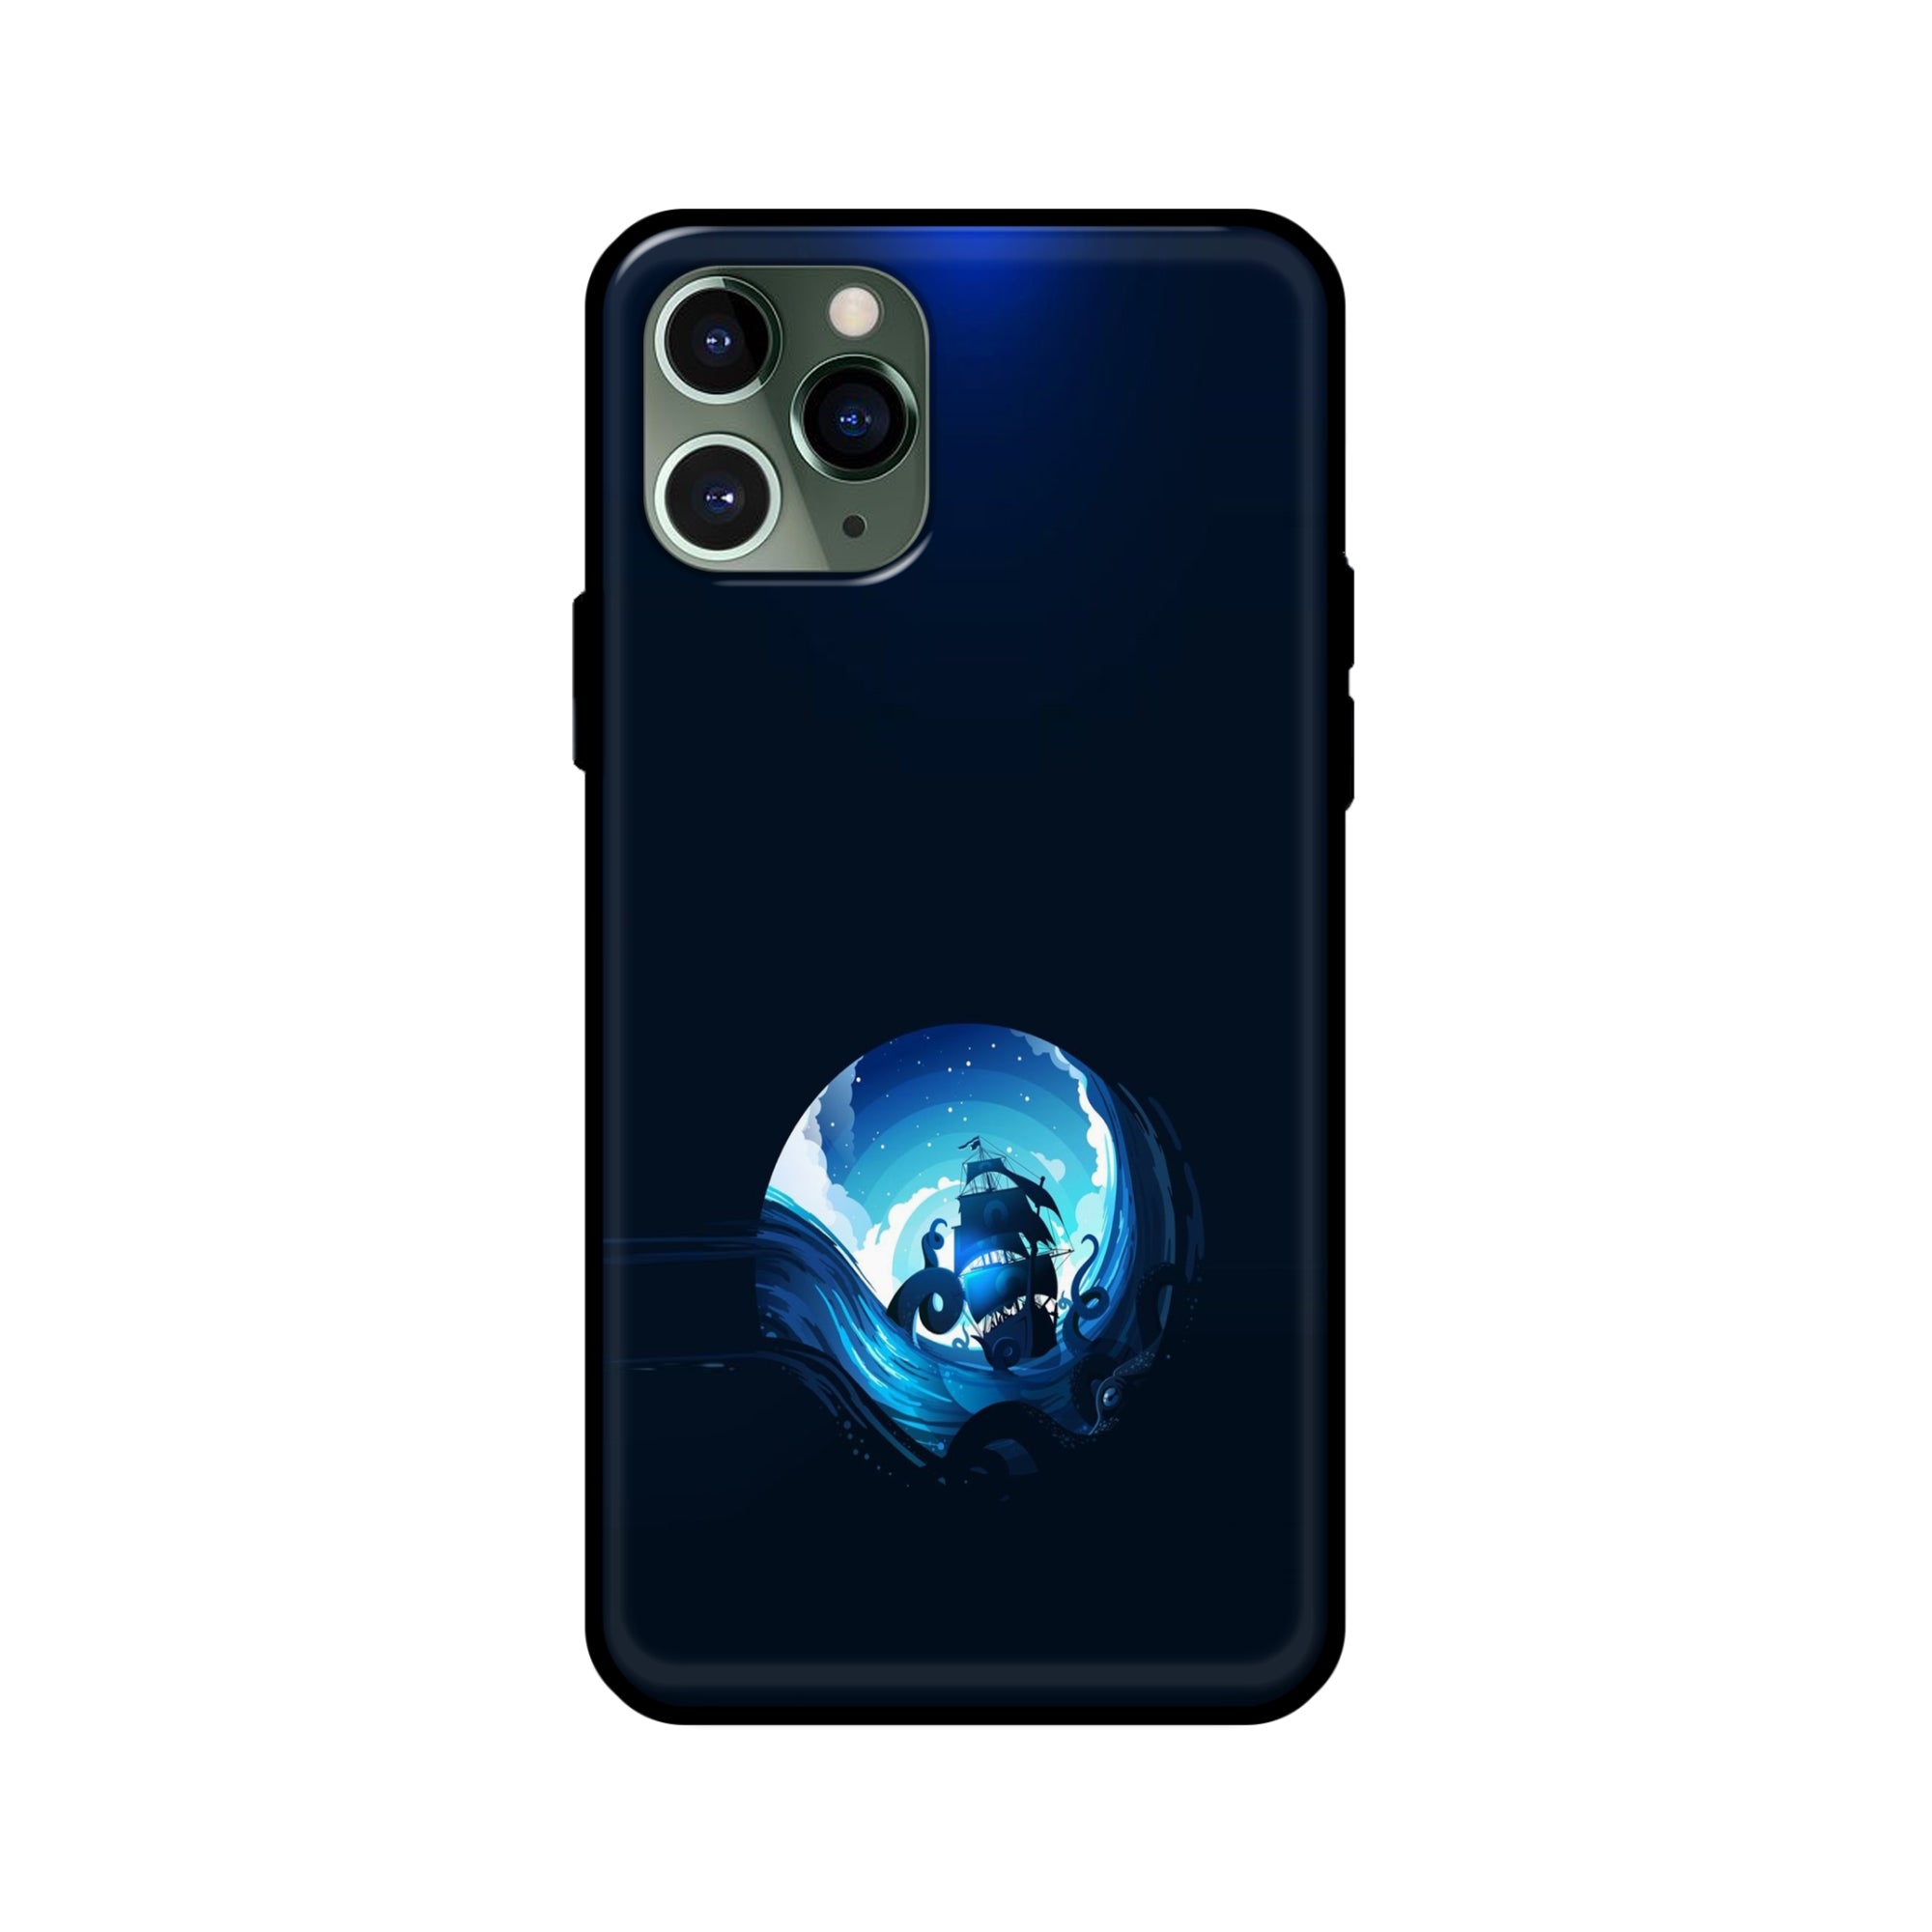 Buy Blue Seaship Glass/Metal Back Mobile Phone Case/Cover For iPhone 11 Pro Online